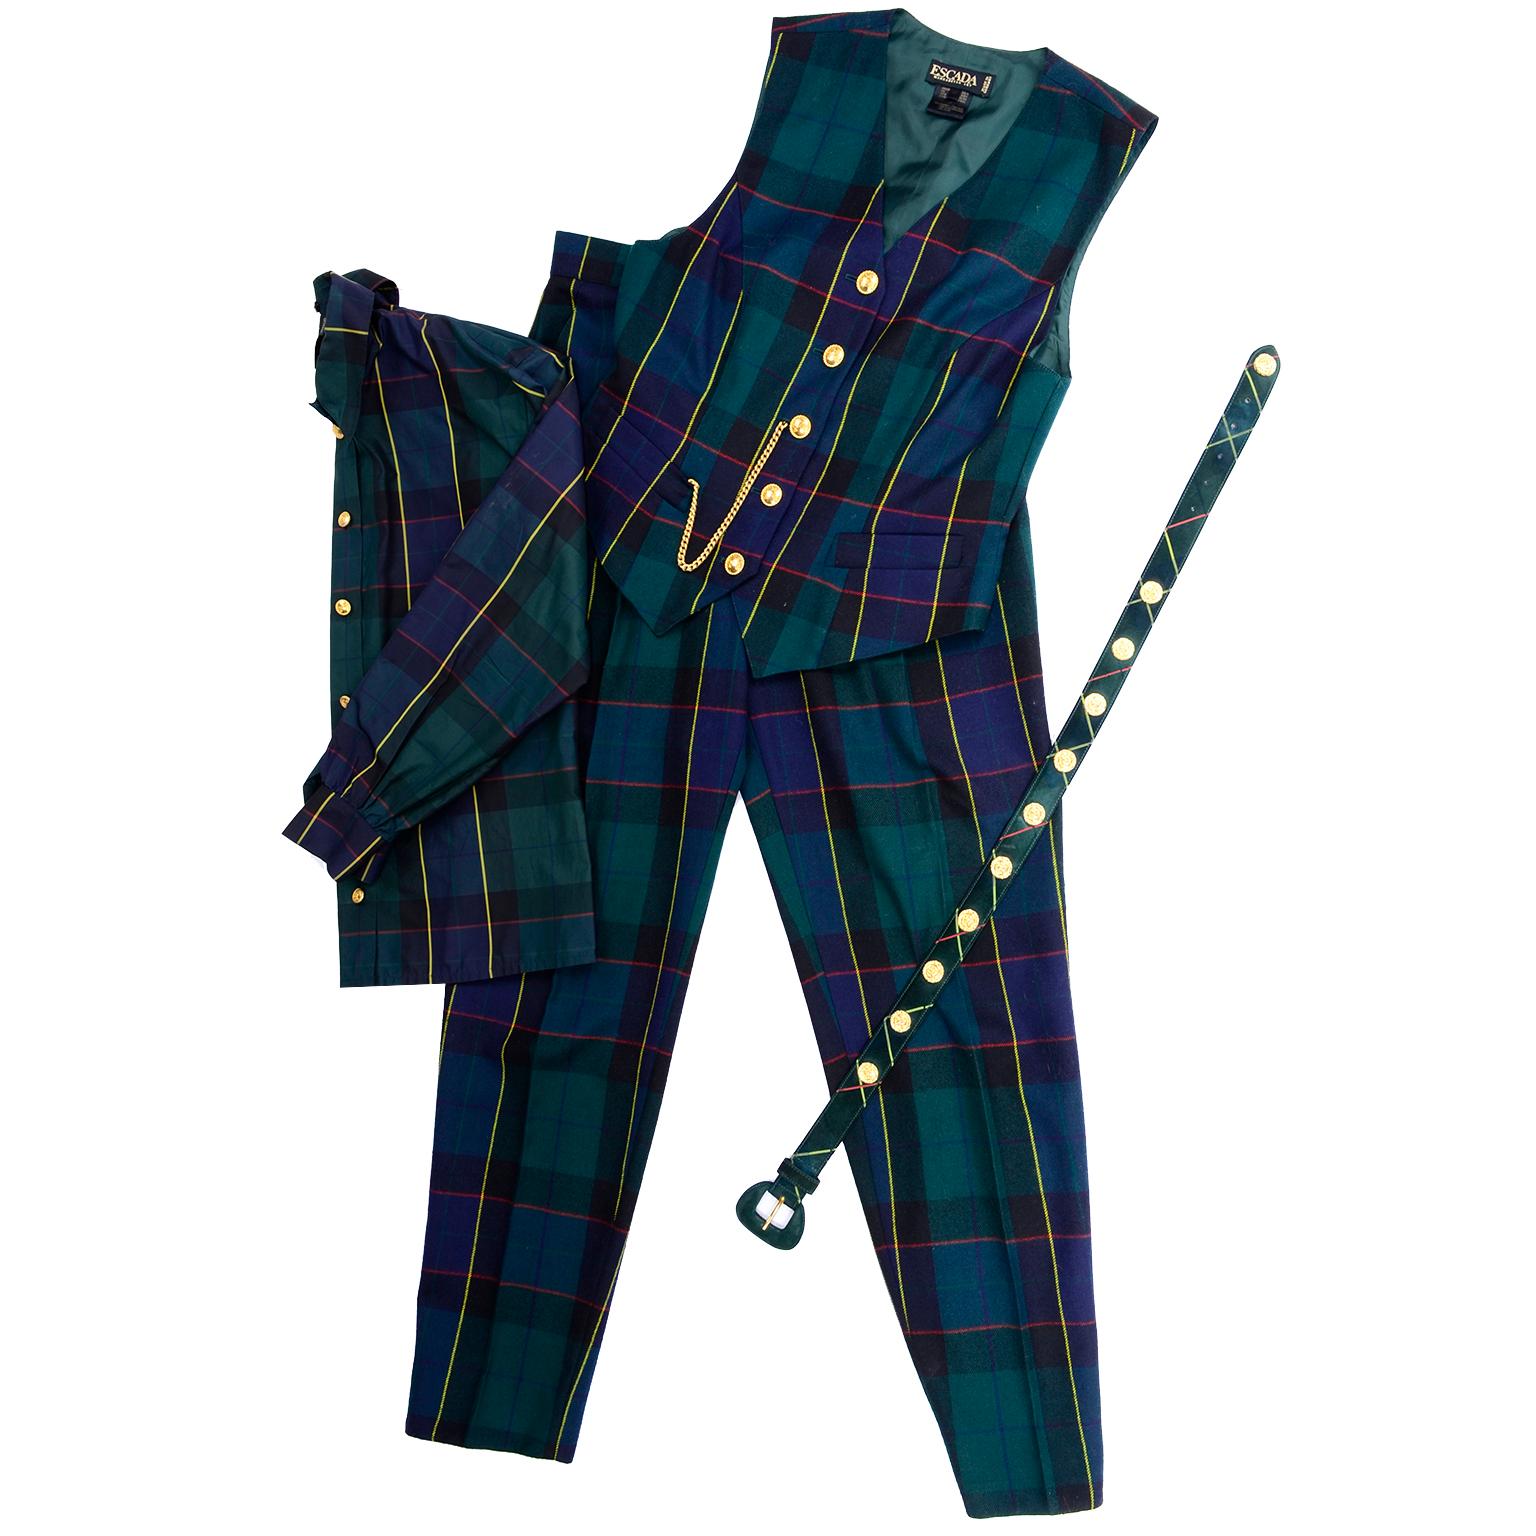 This is an incredible vintage green and blue tartan plaid pant suit from Escada designed by Margaretha Ley in the 1980's.  This ensemble includes a pair of high waisted trousers, a vest, a blouse with a tie, and a belt. 

There are gold rope buttons